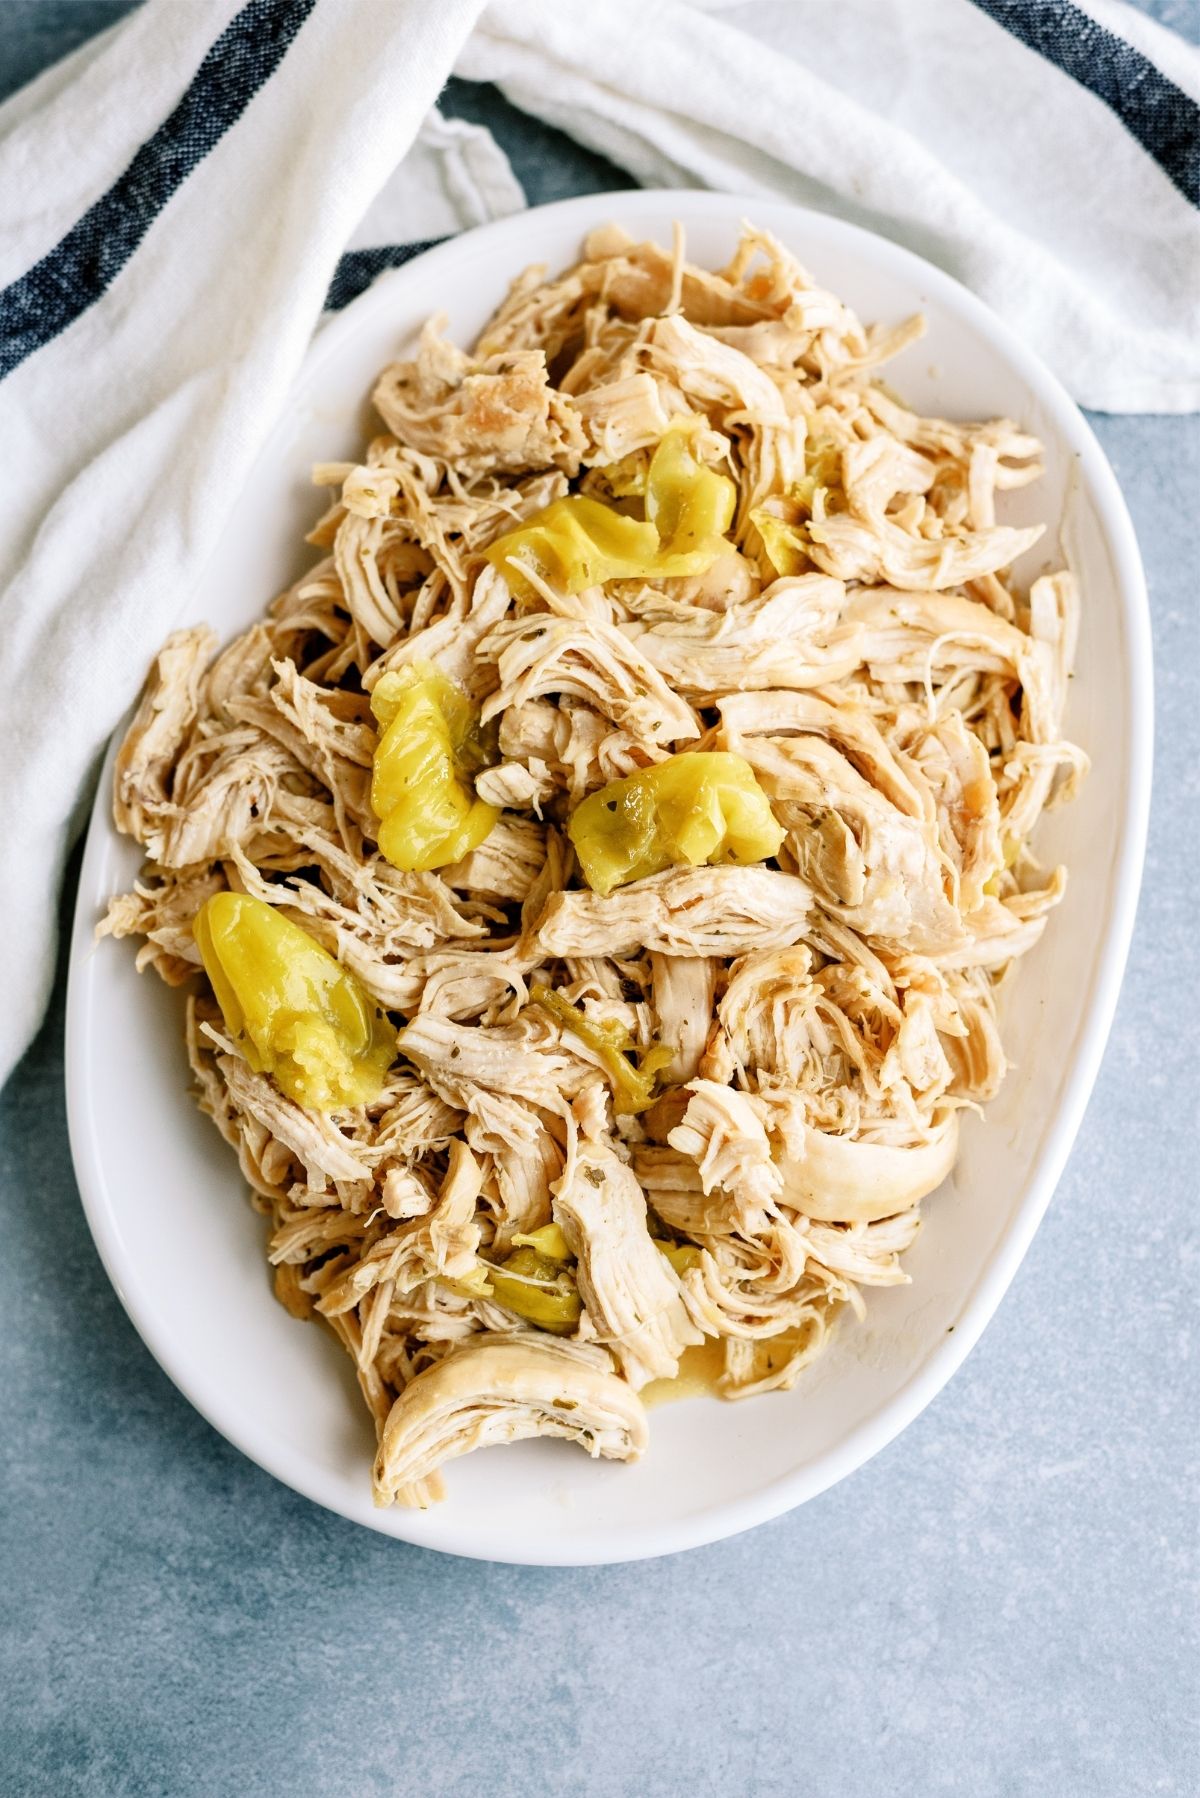 Plate of Instant Pot Mississippi Chicken Sandwich filling